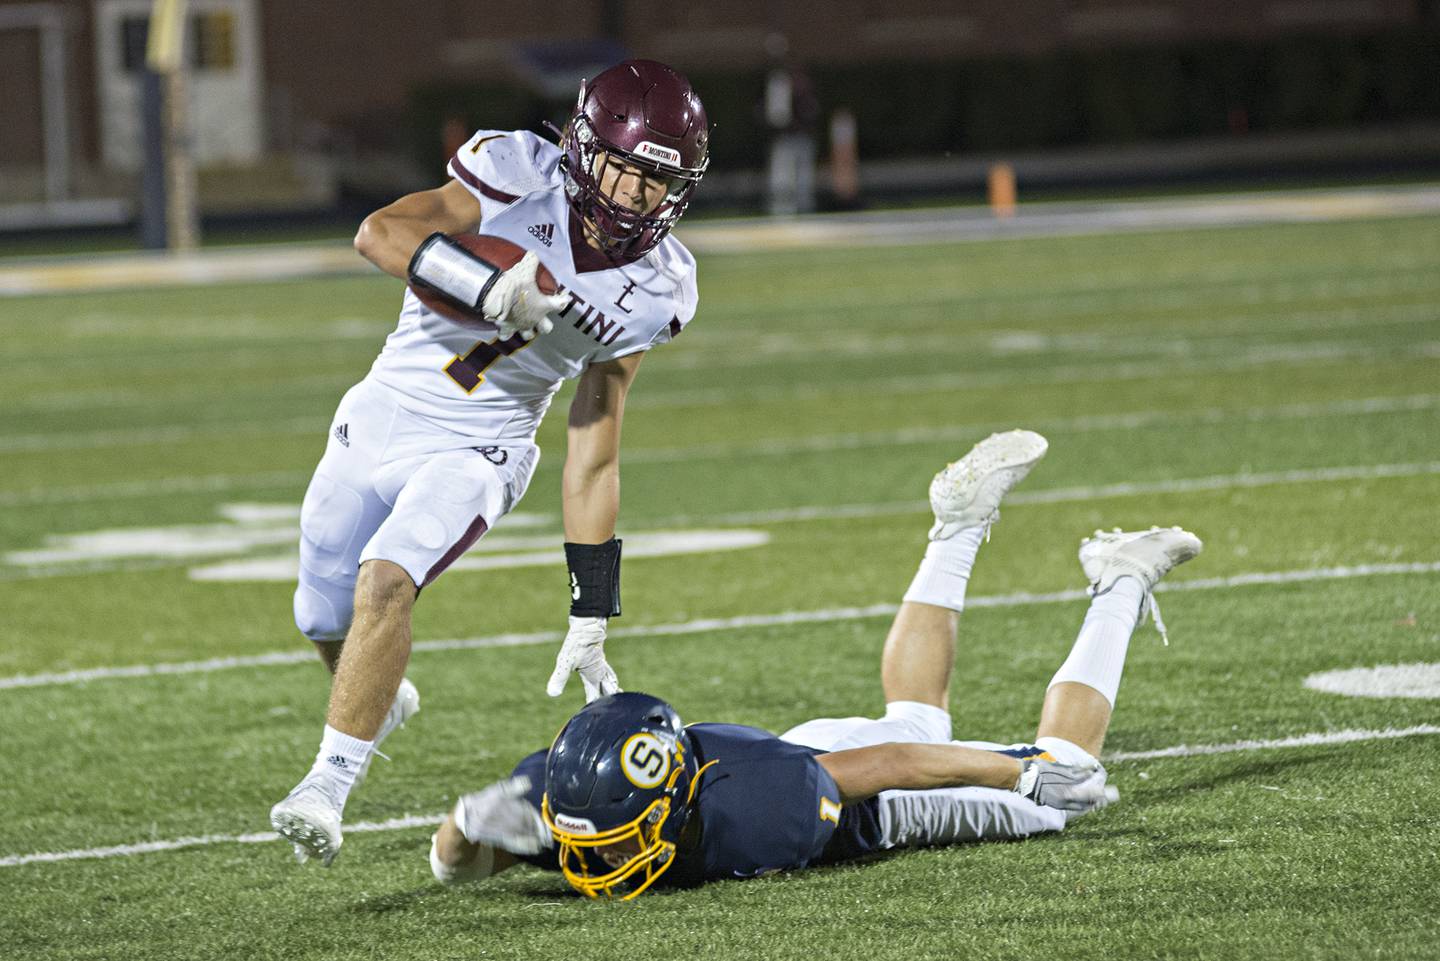 Montini's Mario Florio avoids a tackle by Sterling's Tommy Tate Friday, September 3, 2021.